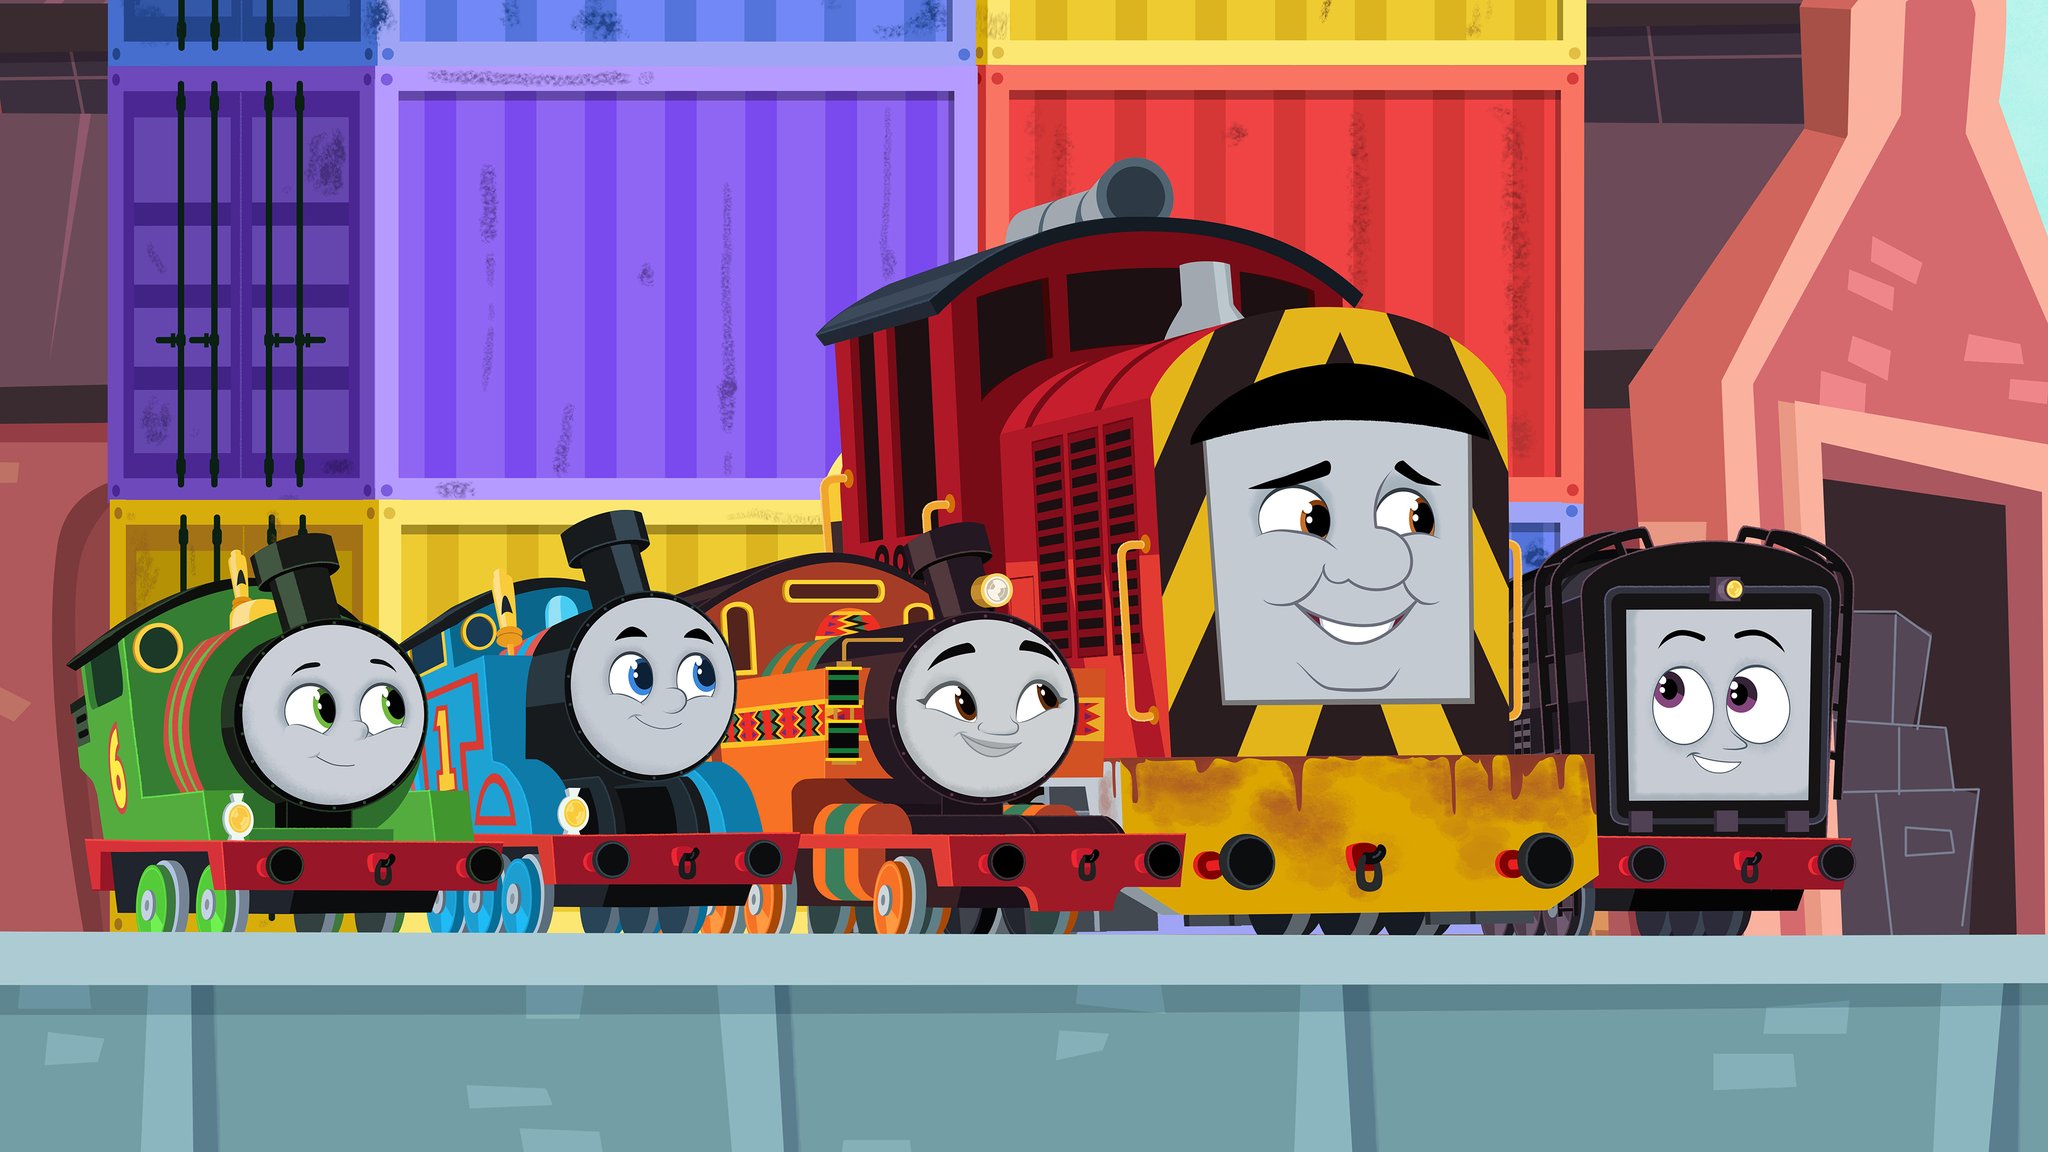 The Red Engines, Thomas the Tank Engine Wikia